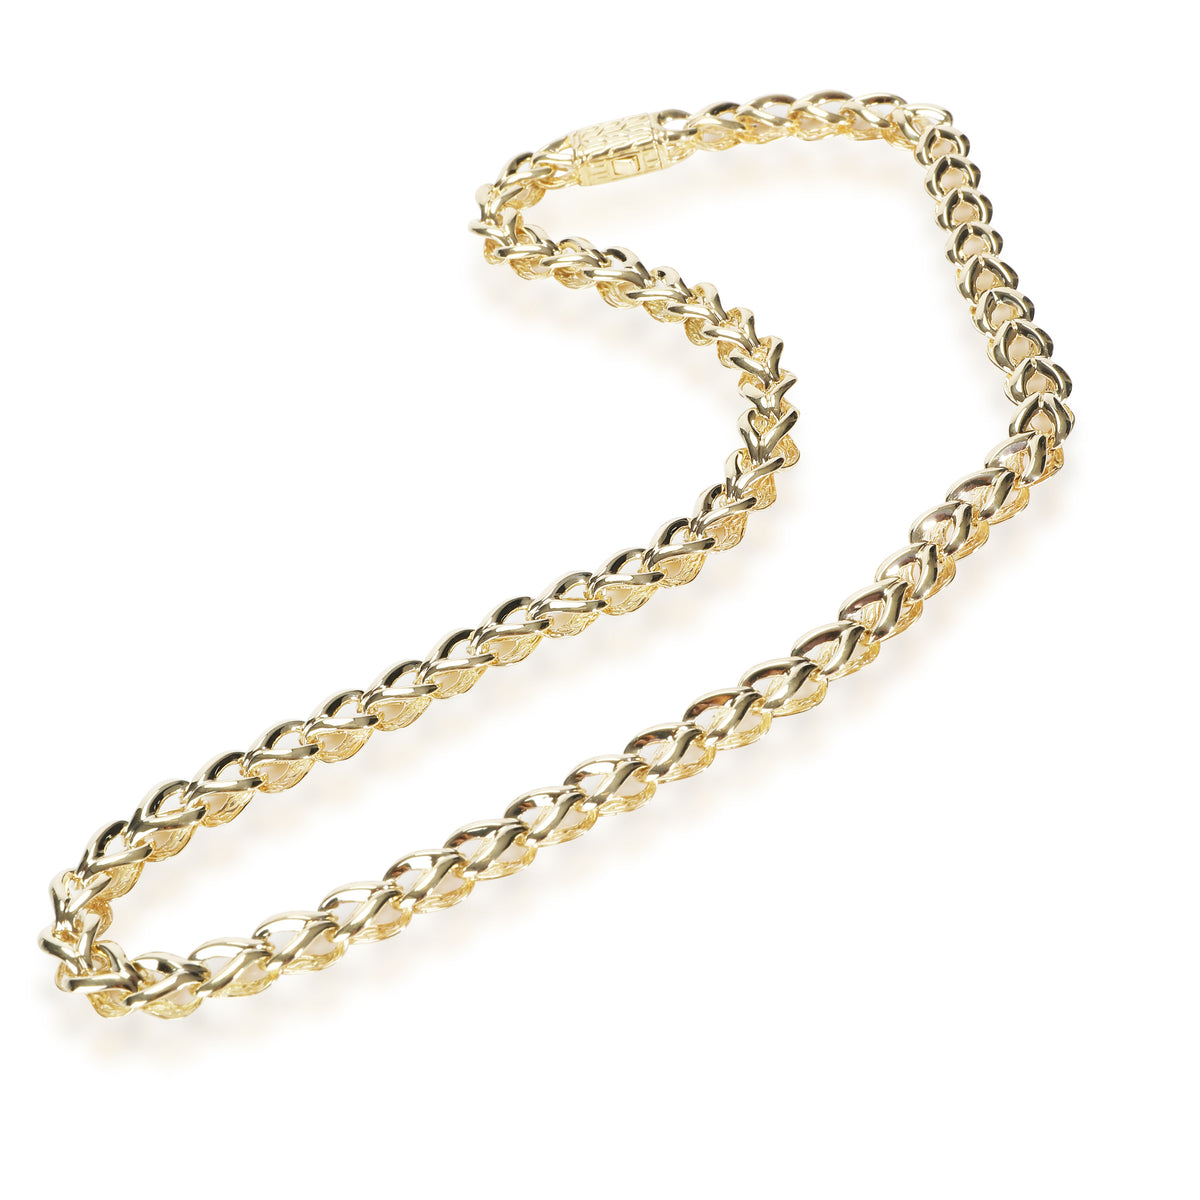 John Hardy Classic Chain Asli Textured & Polished Necklace in 18K Yellow Gold